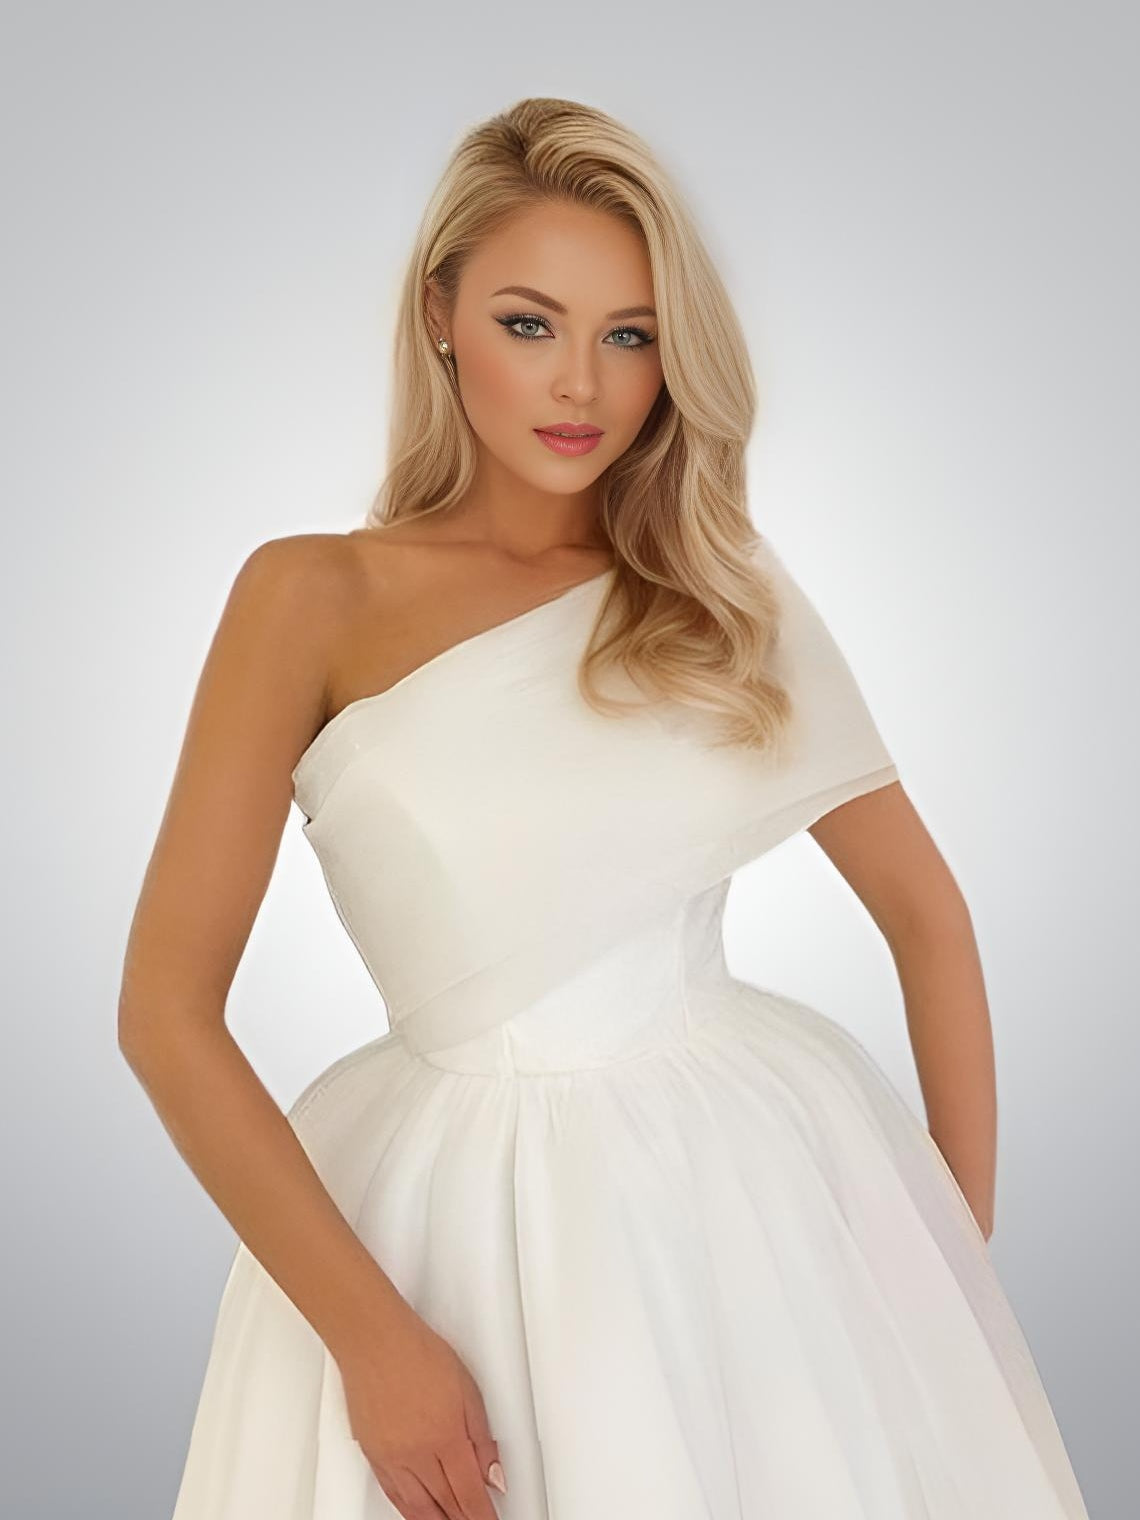 Fashionable woman posing in white simple one shoulder evening gown